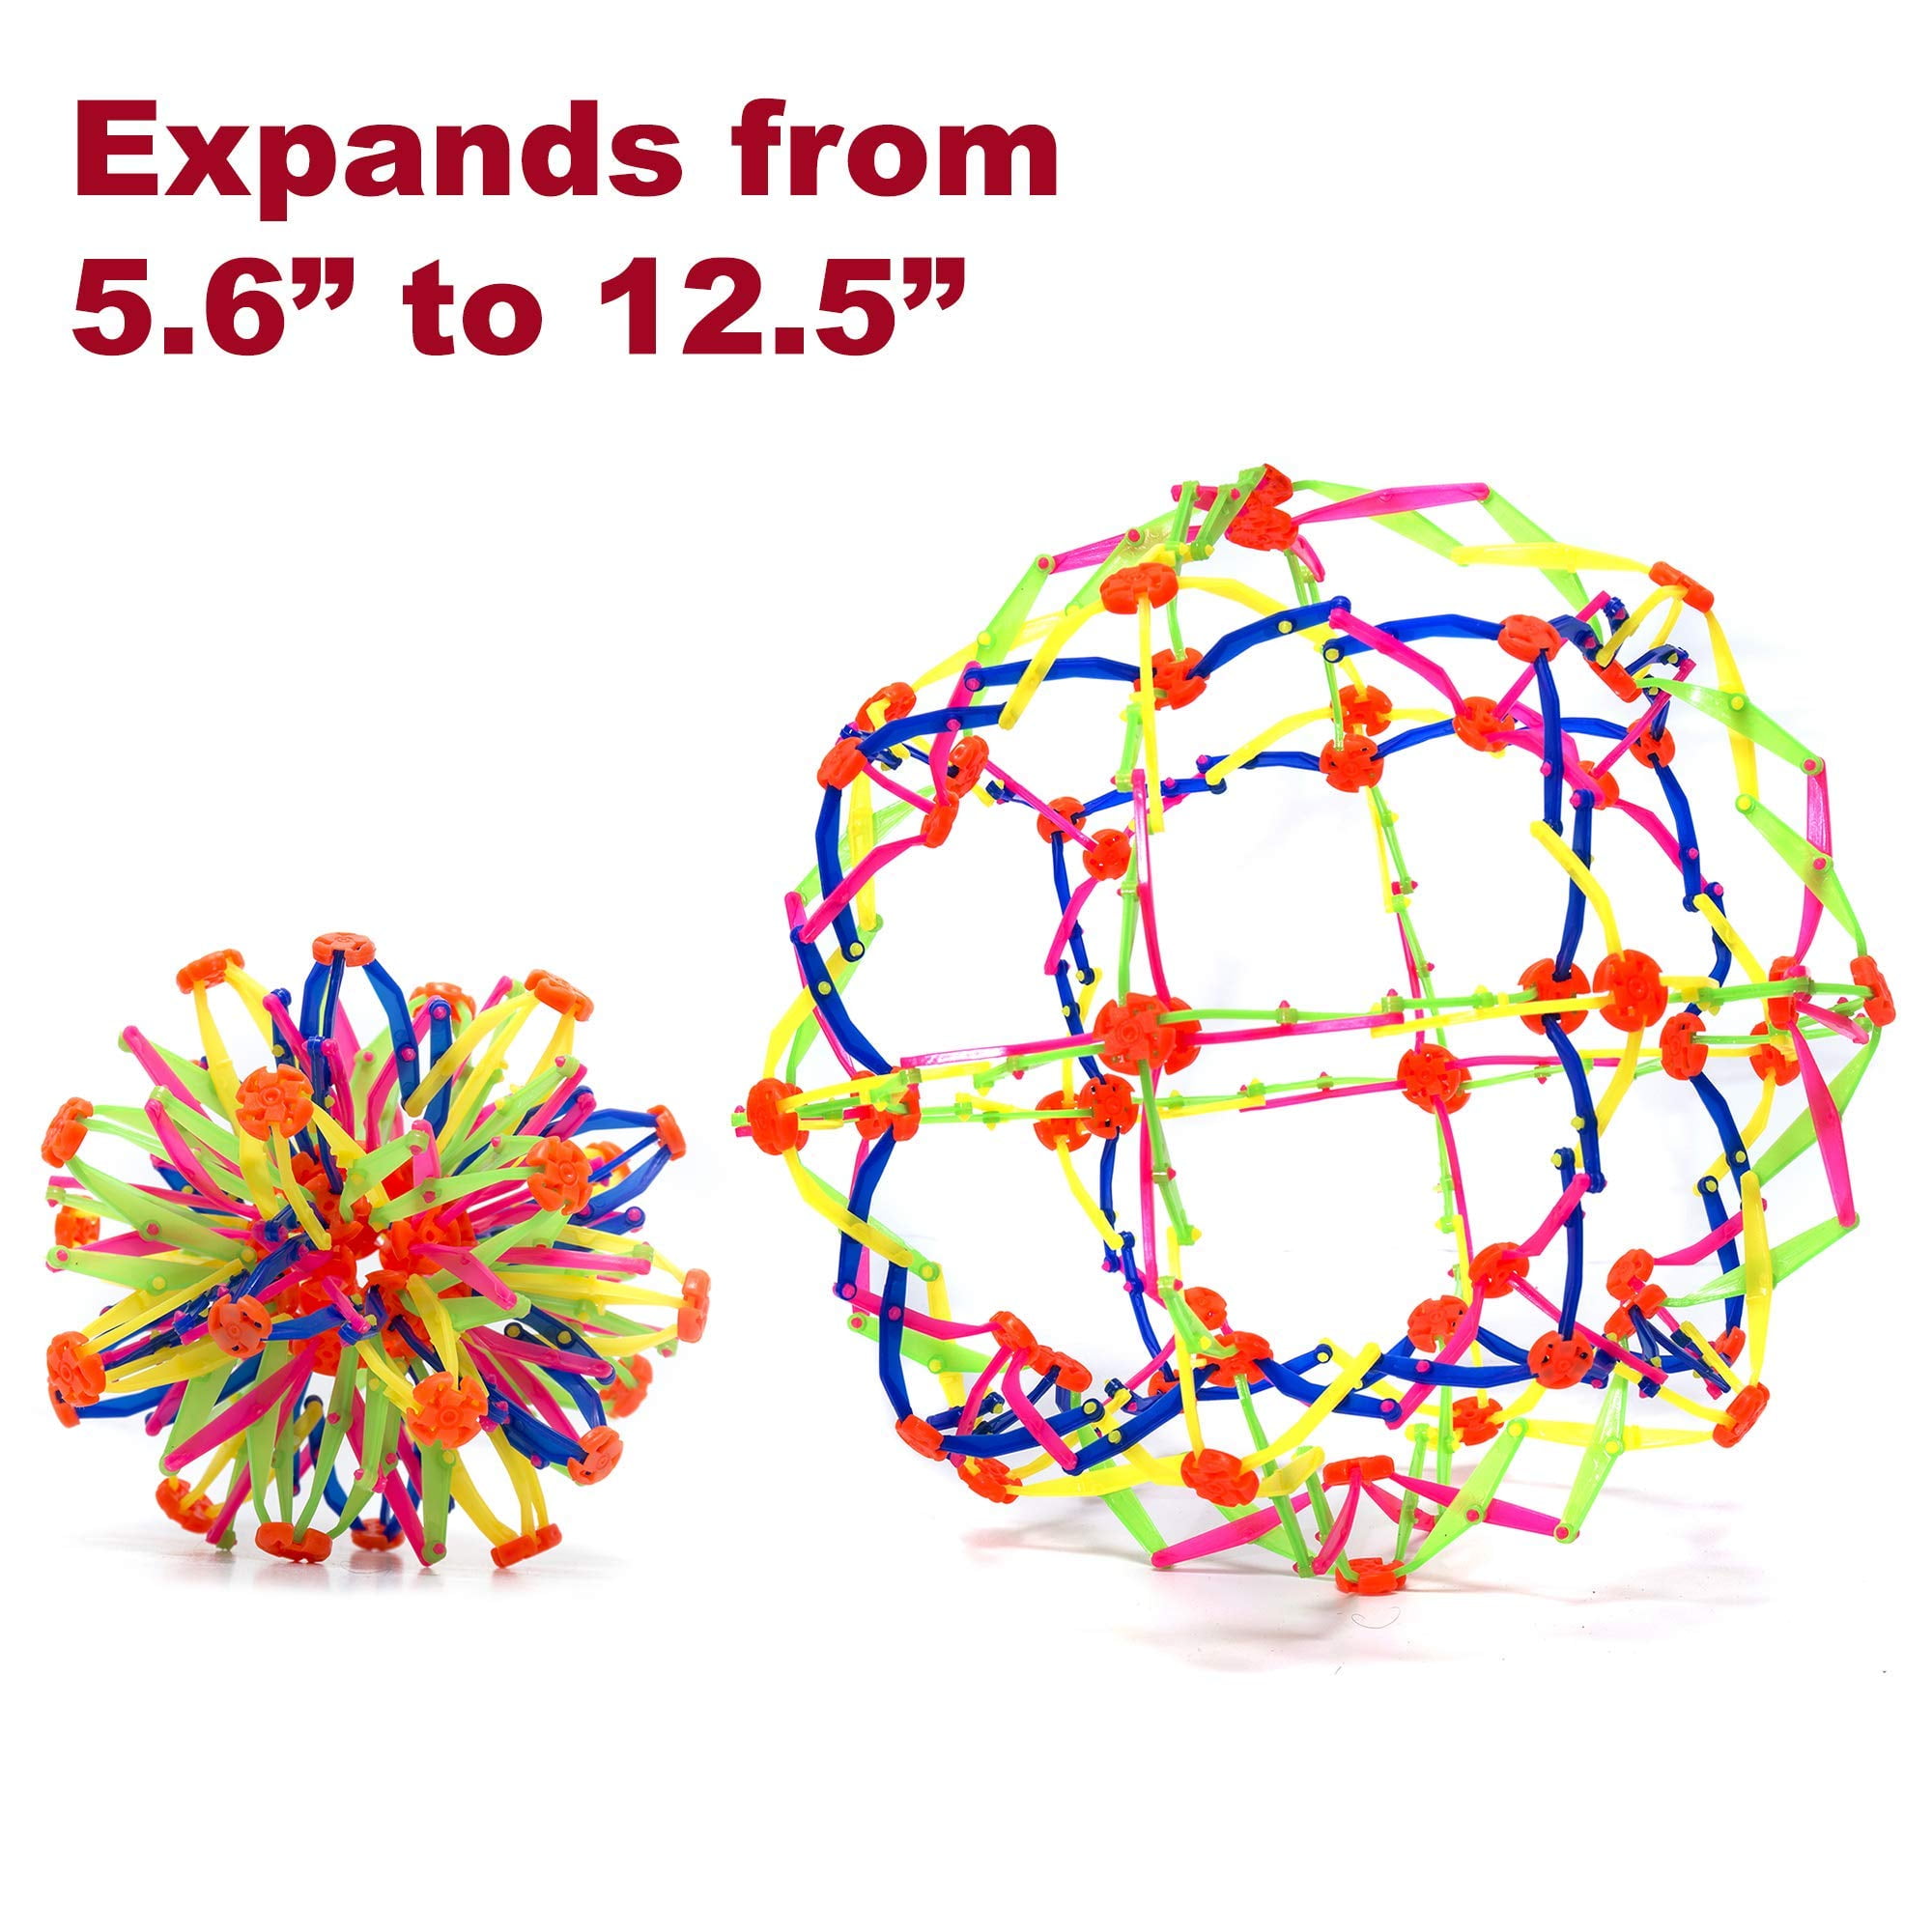 Biayxms Expandable Breathing Ball Toy Sphere for Kids Stress